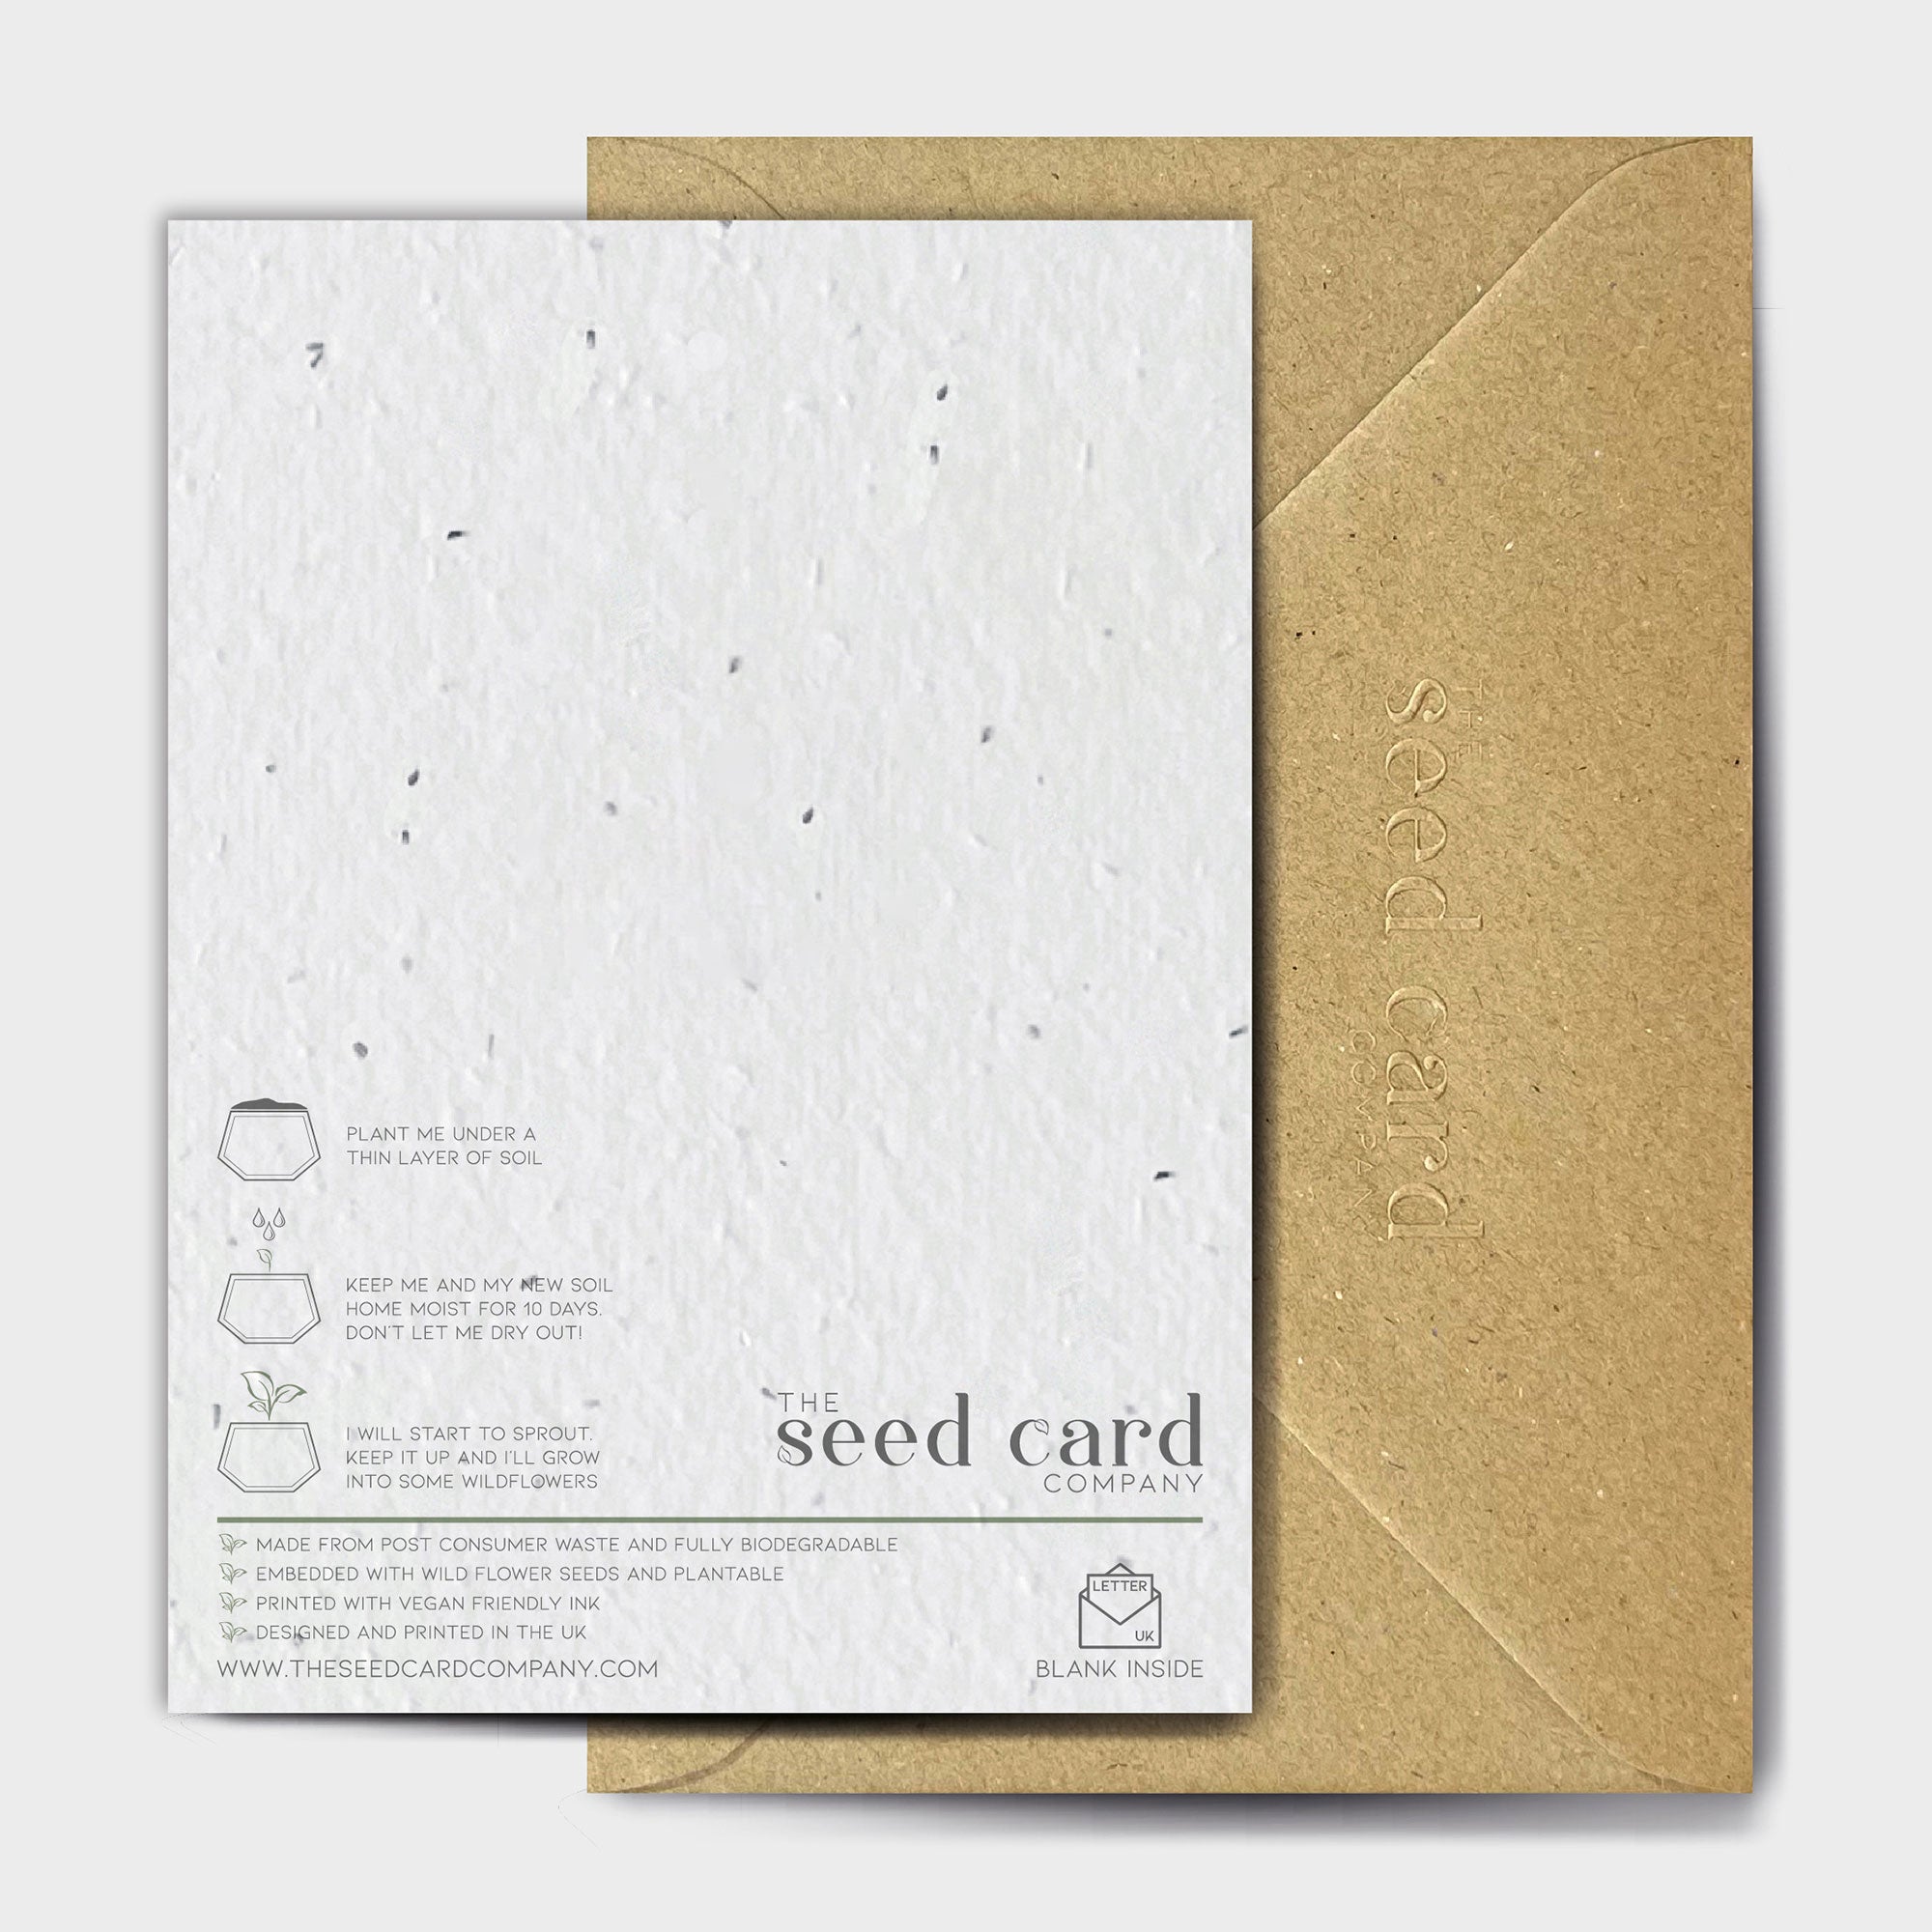 Shop online Spilt The Ink - 100% biodegradable seed-embedded cards Shop -The Seed Card Company